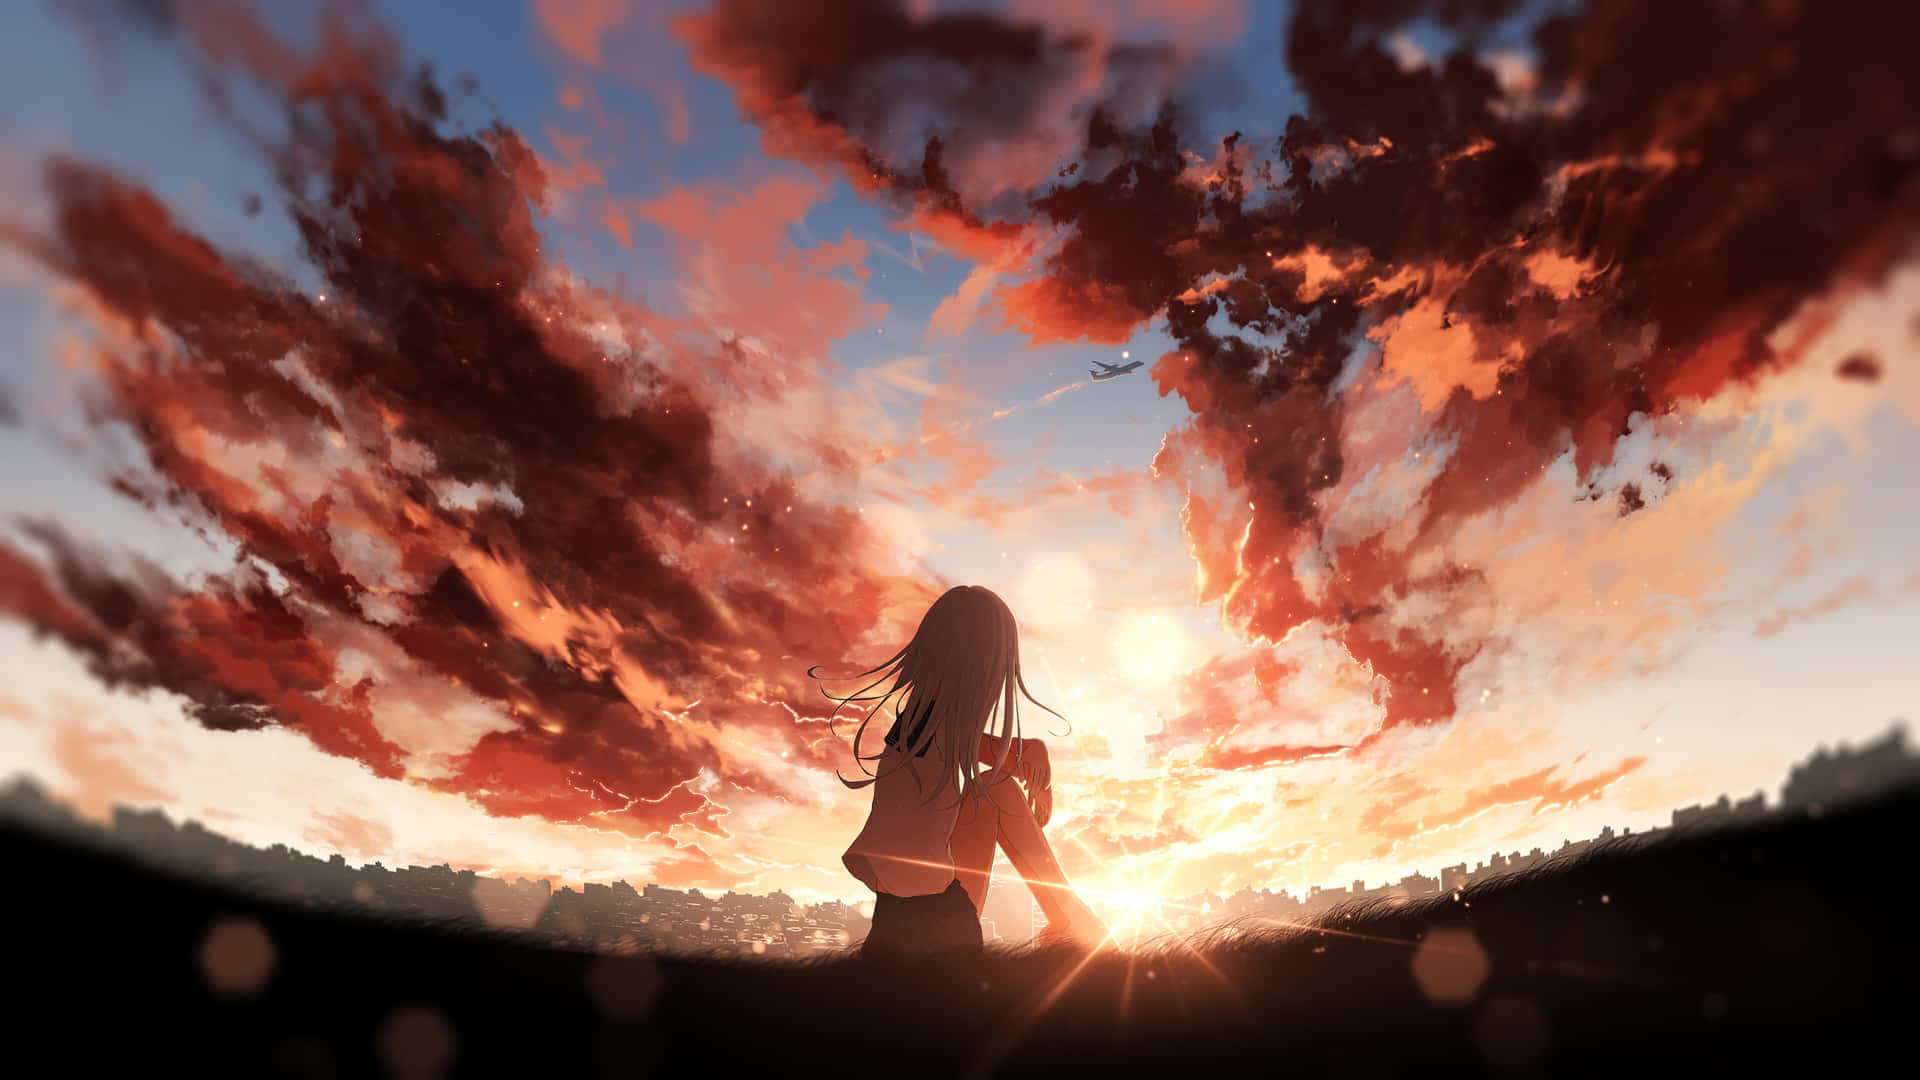 Feel The Peacefulness Of This Anime Sunset.